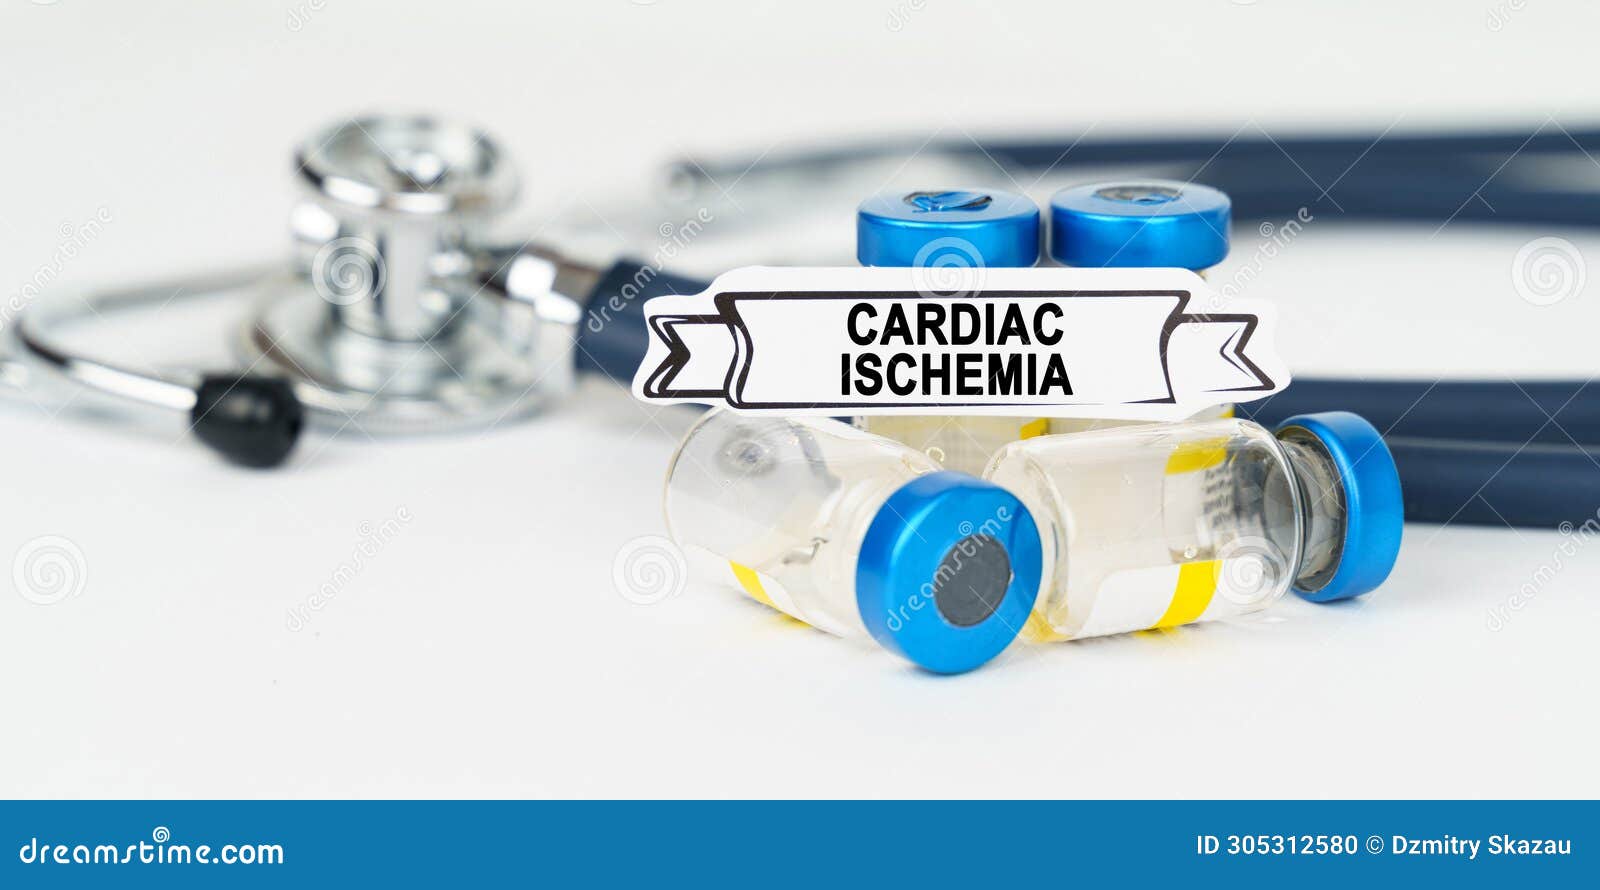 on the table there is a stethoscope, injections and a sign with the inscription - cardiac ischemia